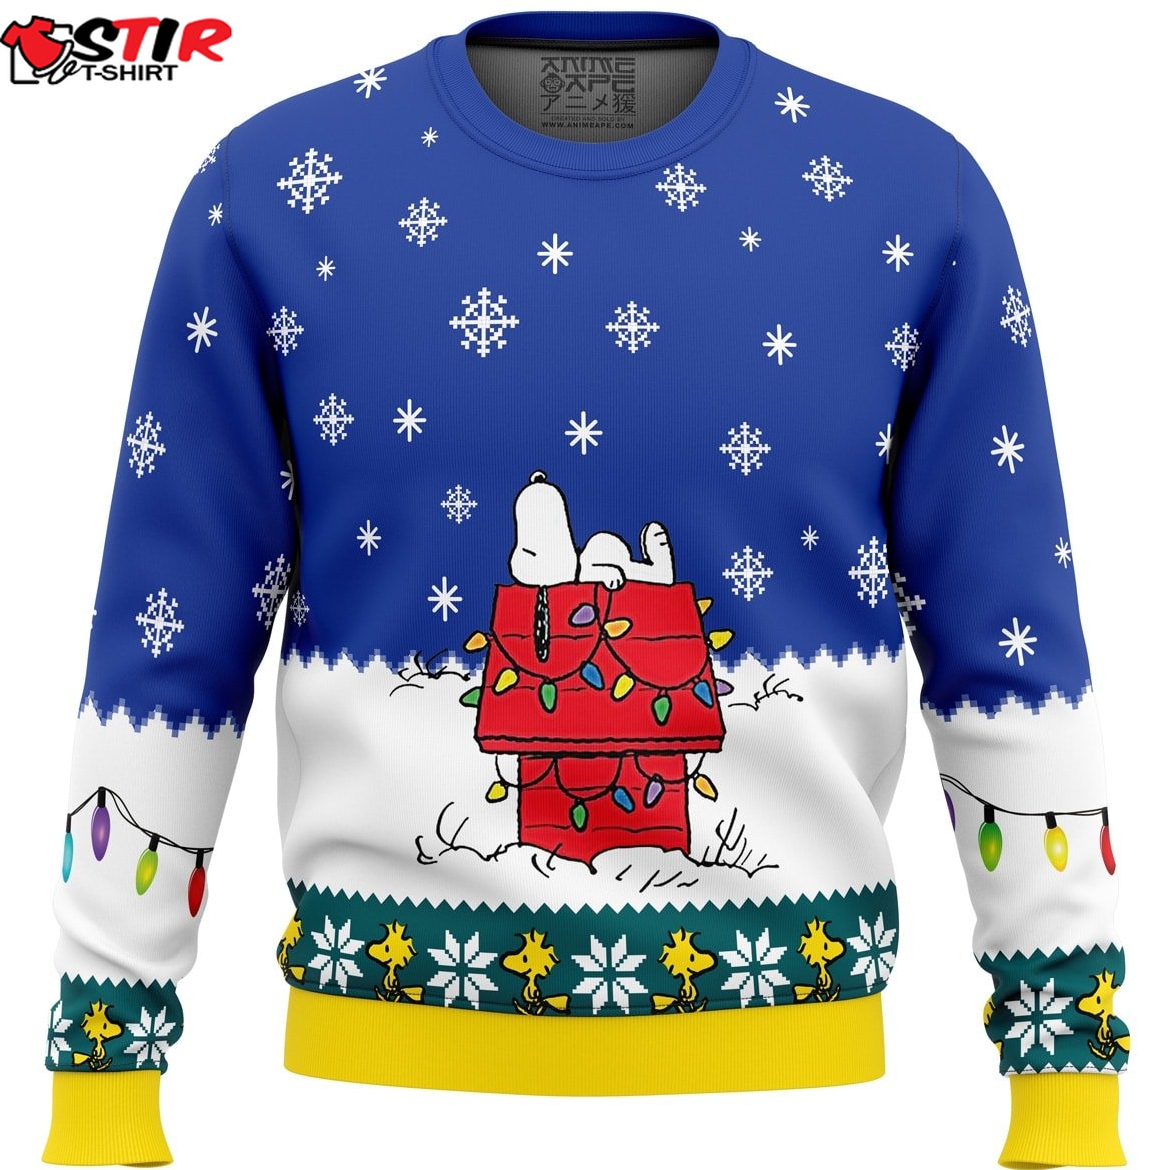 Snoopy Ugly Christmas Sweater Stirtshirt